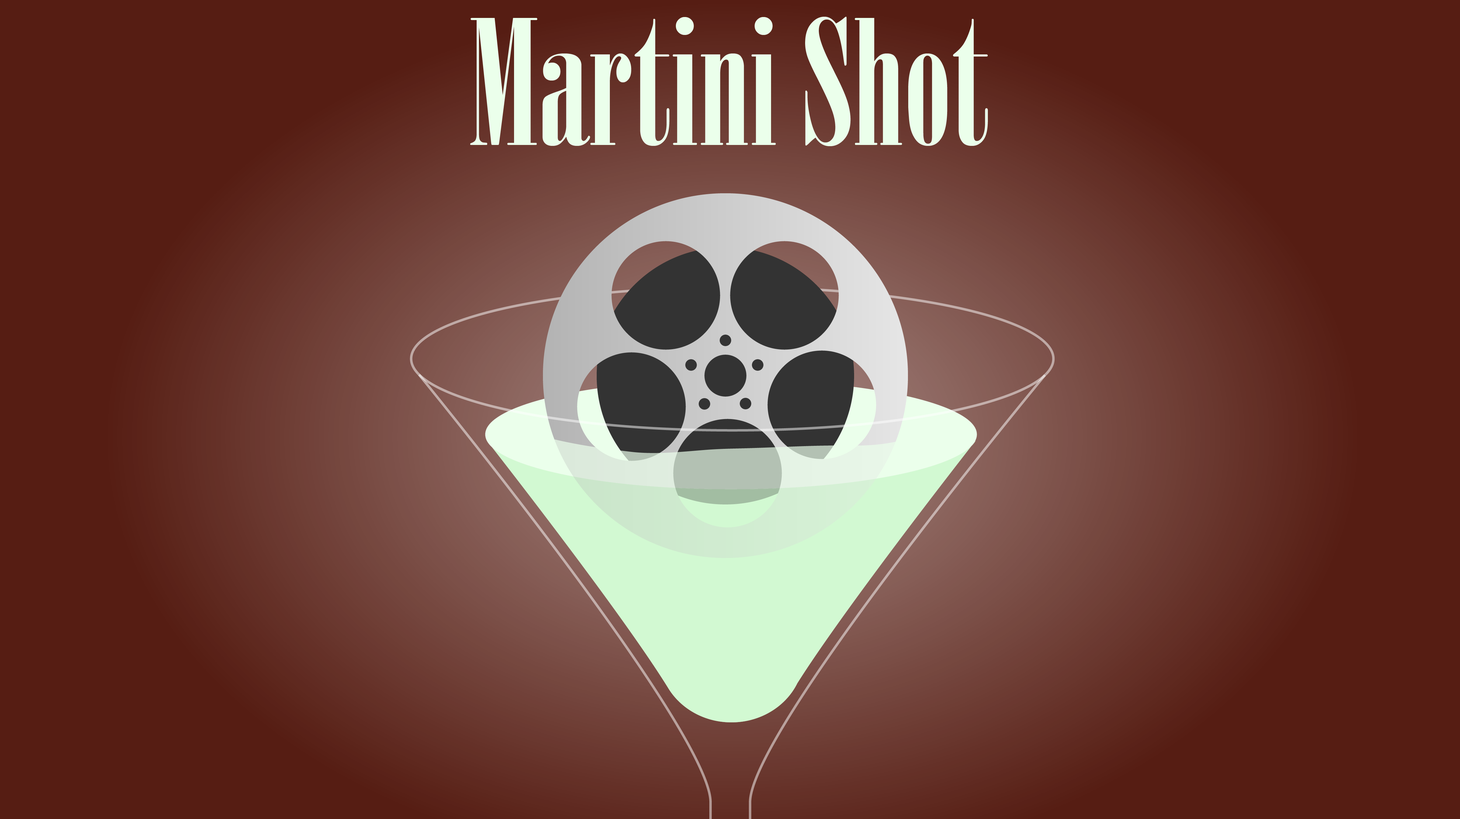 On today’s Martini Shot Rob talk about two kinds of people: the ones who like conflict and the ones who avoid it. Guess which group is richer?